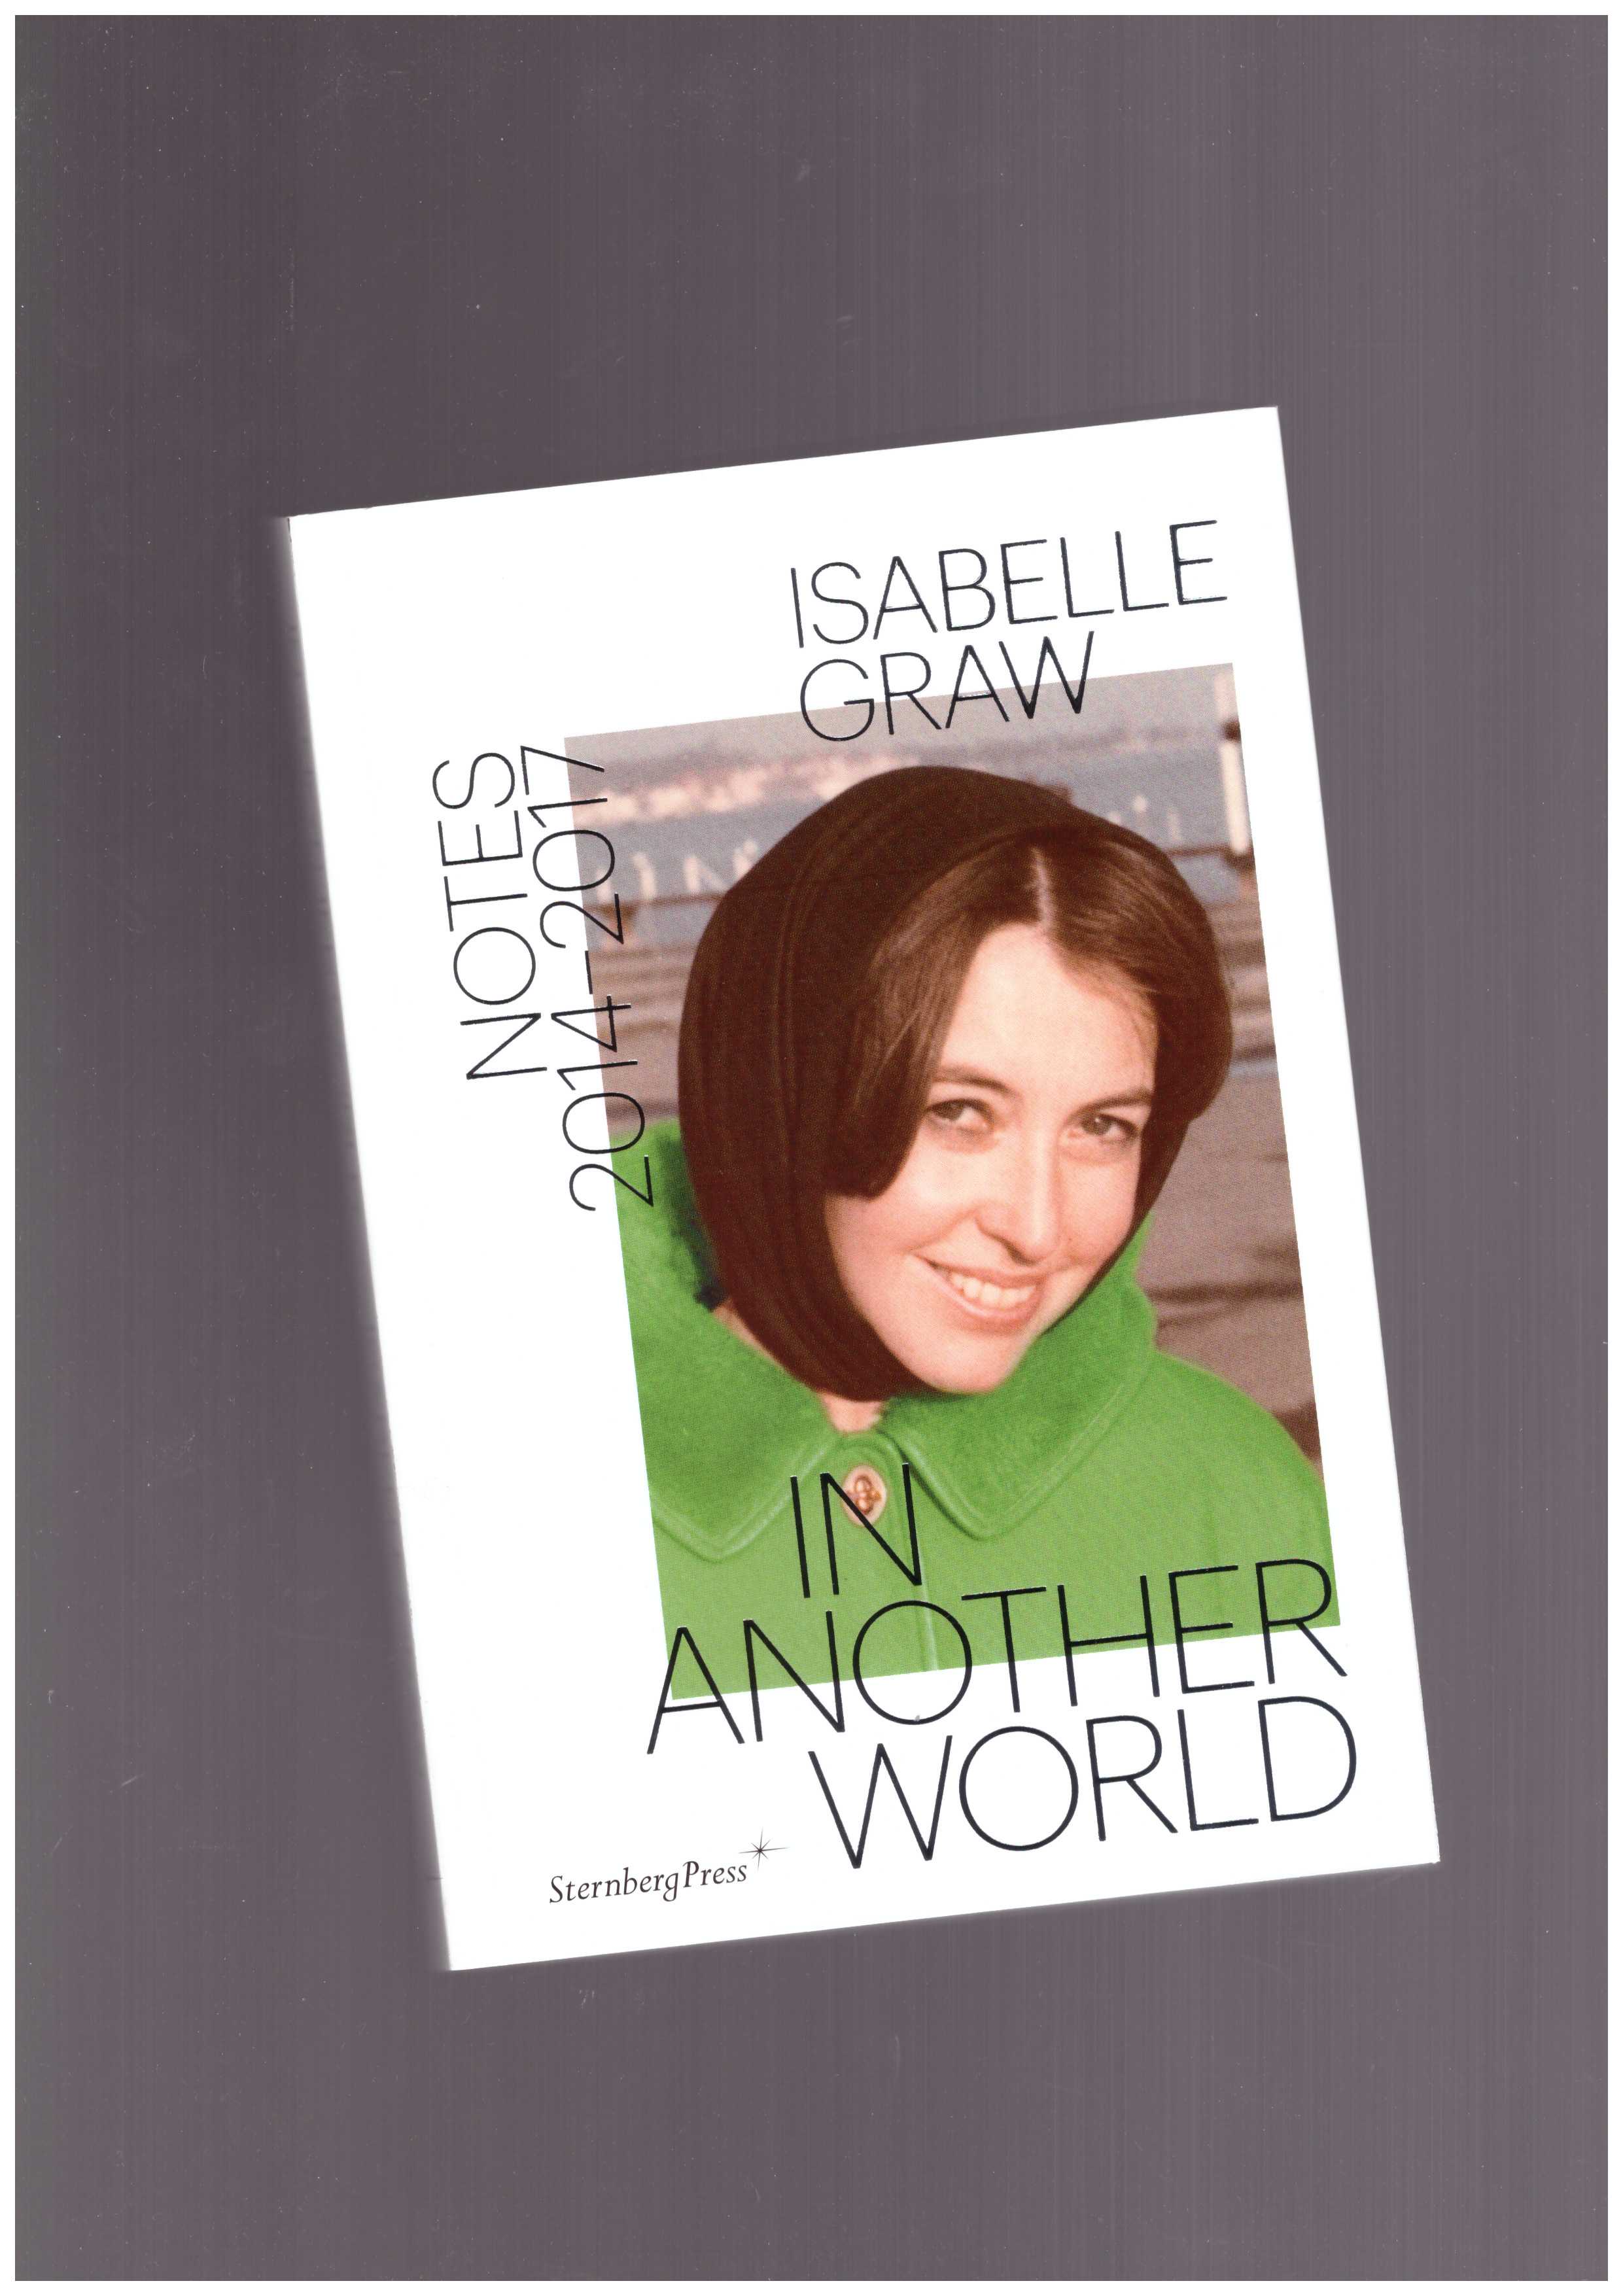 GRAW, Isabelle - In Another World – Notes, 2014–2017